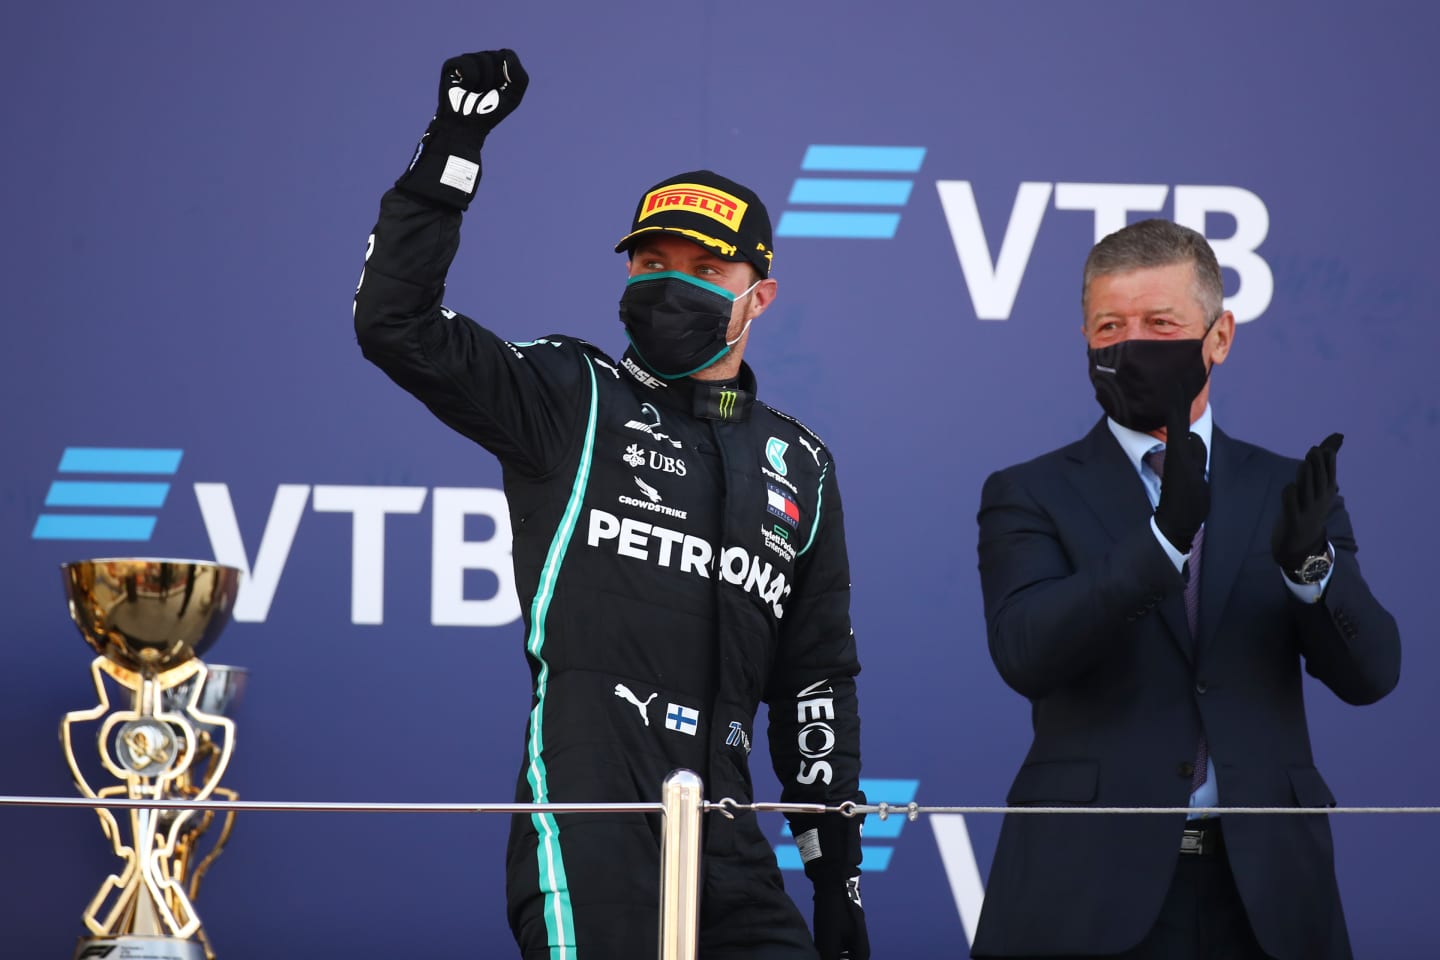 SOCHI, RUSSIA - SEPTEMBER 27: Race winner Valtteri Bottas of Finland and Mercedes GP celebrates on the podium during the F1 Grand Prix of Russia at Sochi Autodrom on September 27, 2020 in Sochi, Russia. (Photo by Bryn Lennon/Getty Images)